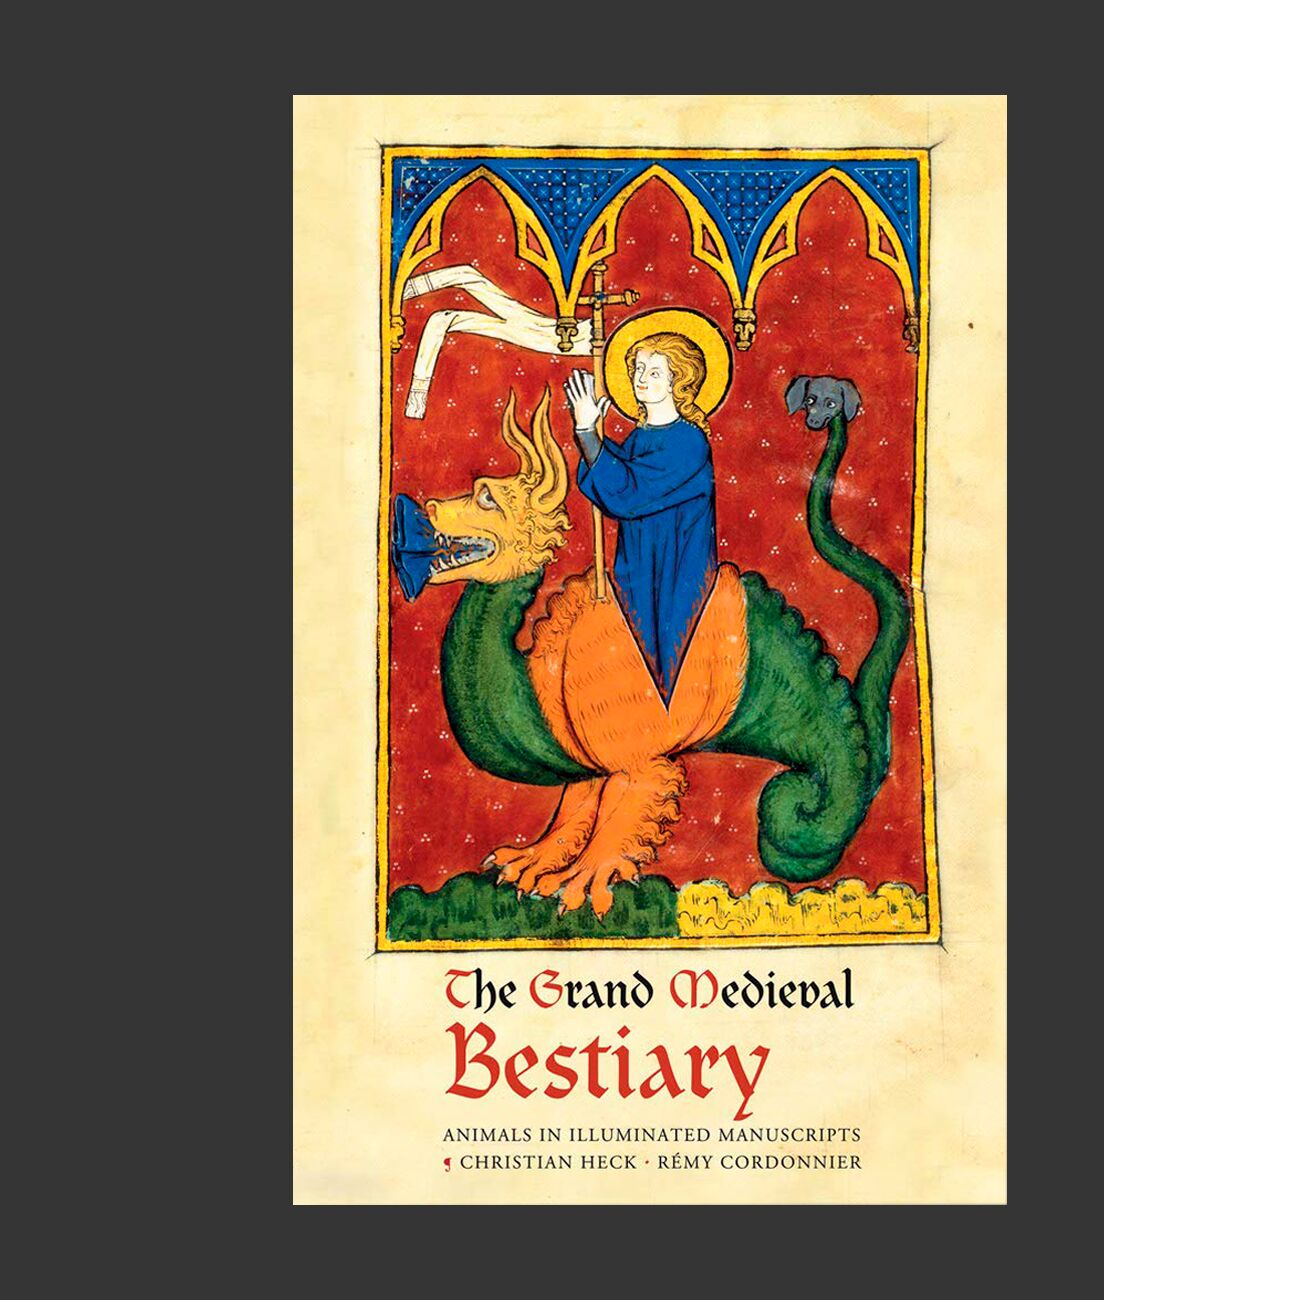 The Grand Medieval Bestiary (Dragonet Edition): Animals in Illuminated Manuscripts